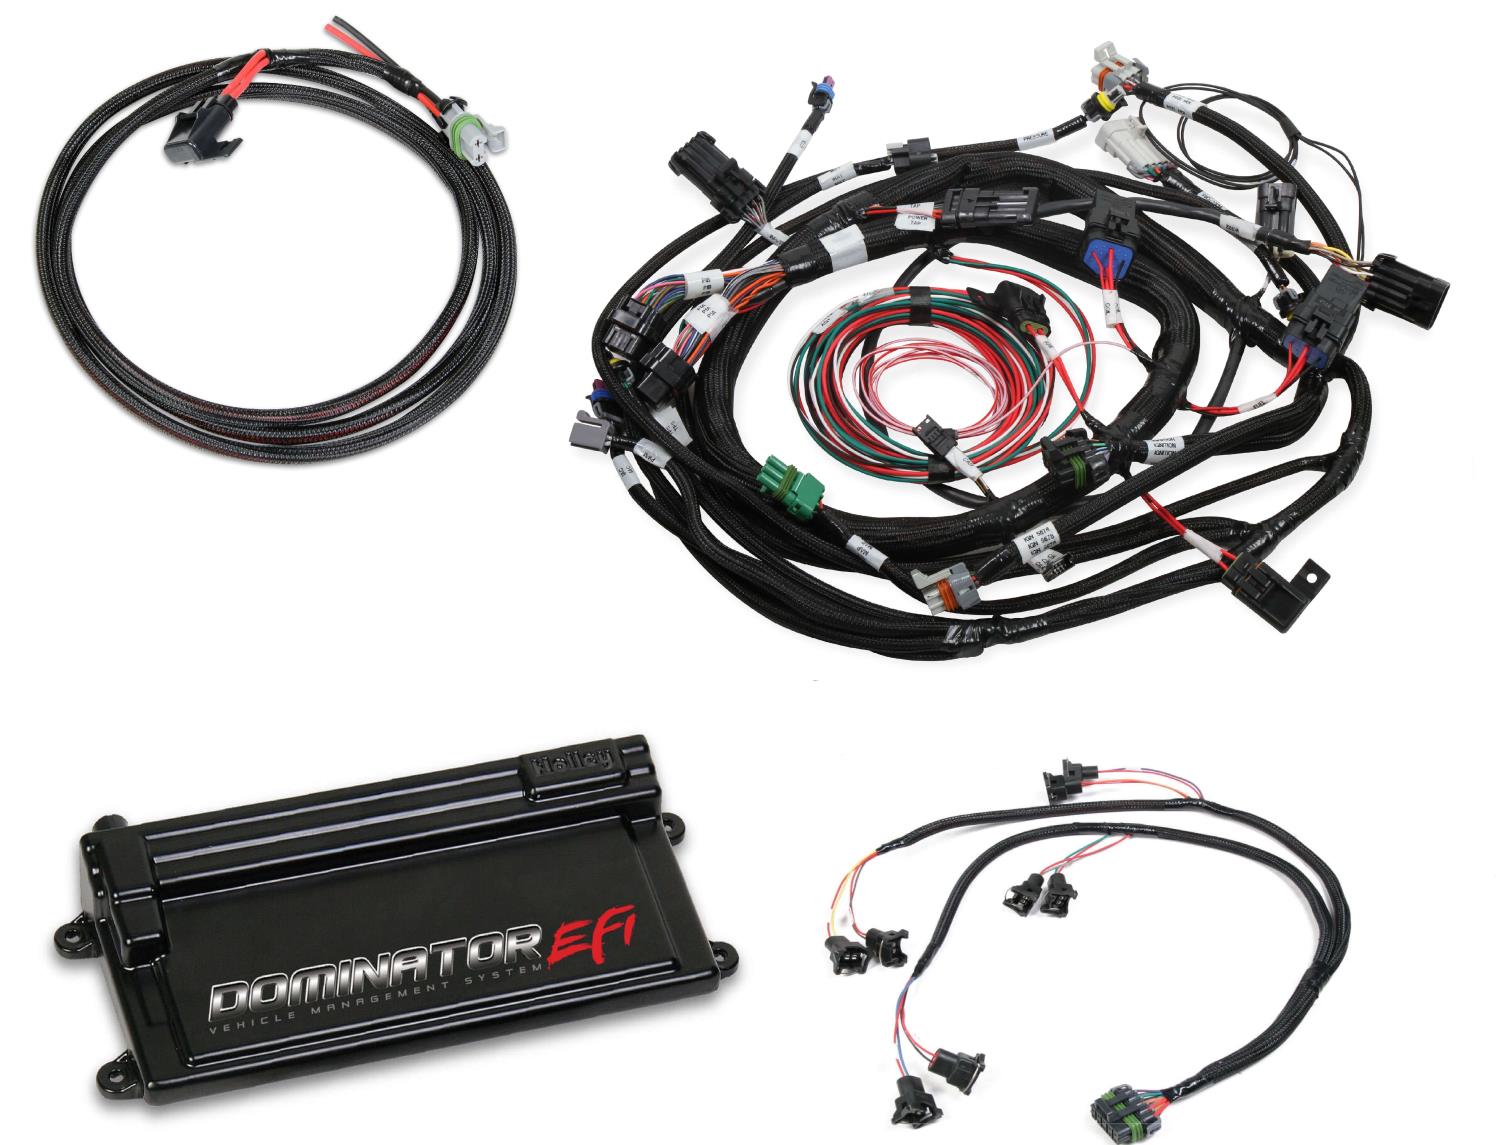 Dominator EFI ECU with Universal (Ford Engines) Main Harness w/Coil-On-Plug Sub Harness and EV1 Injector Harness